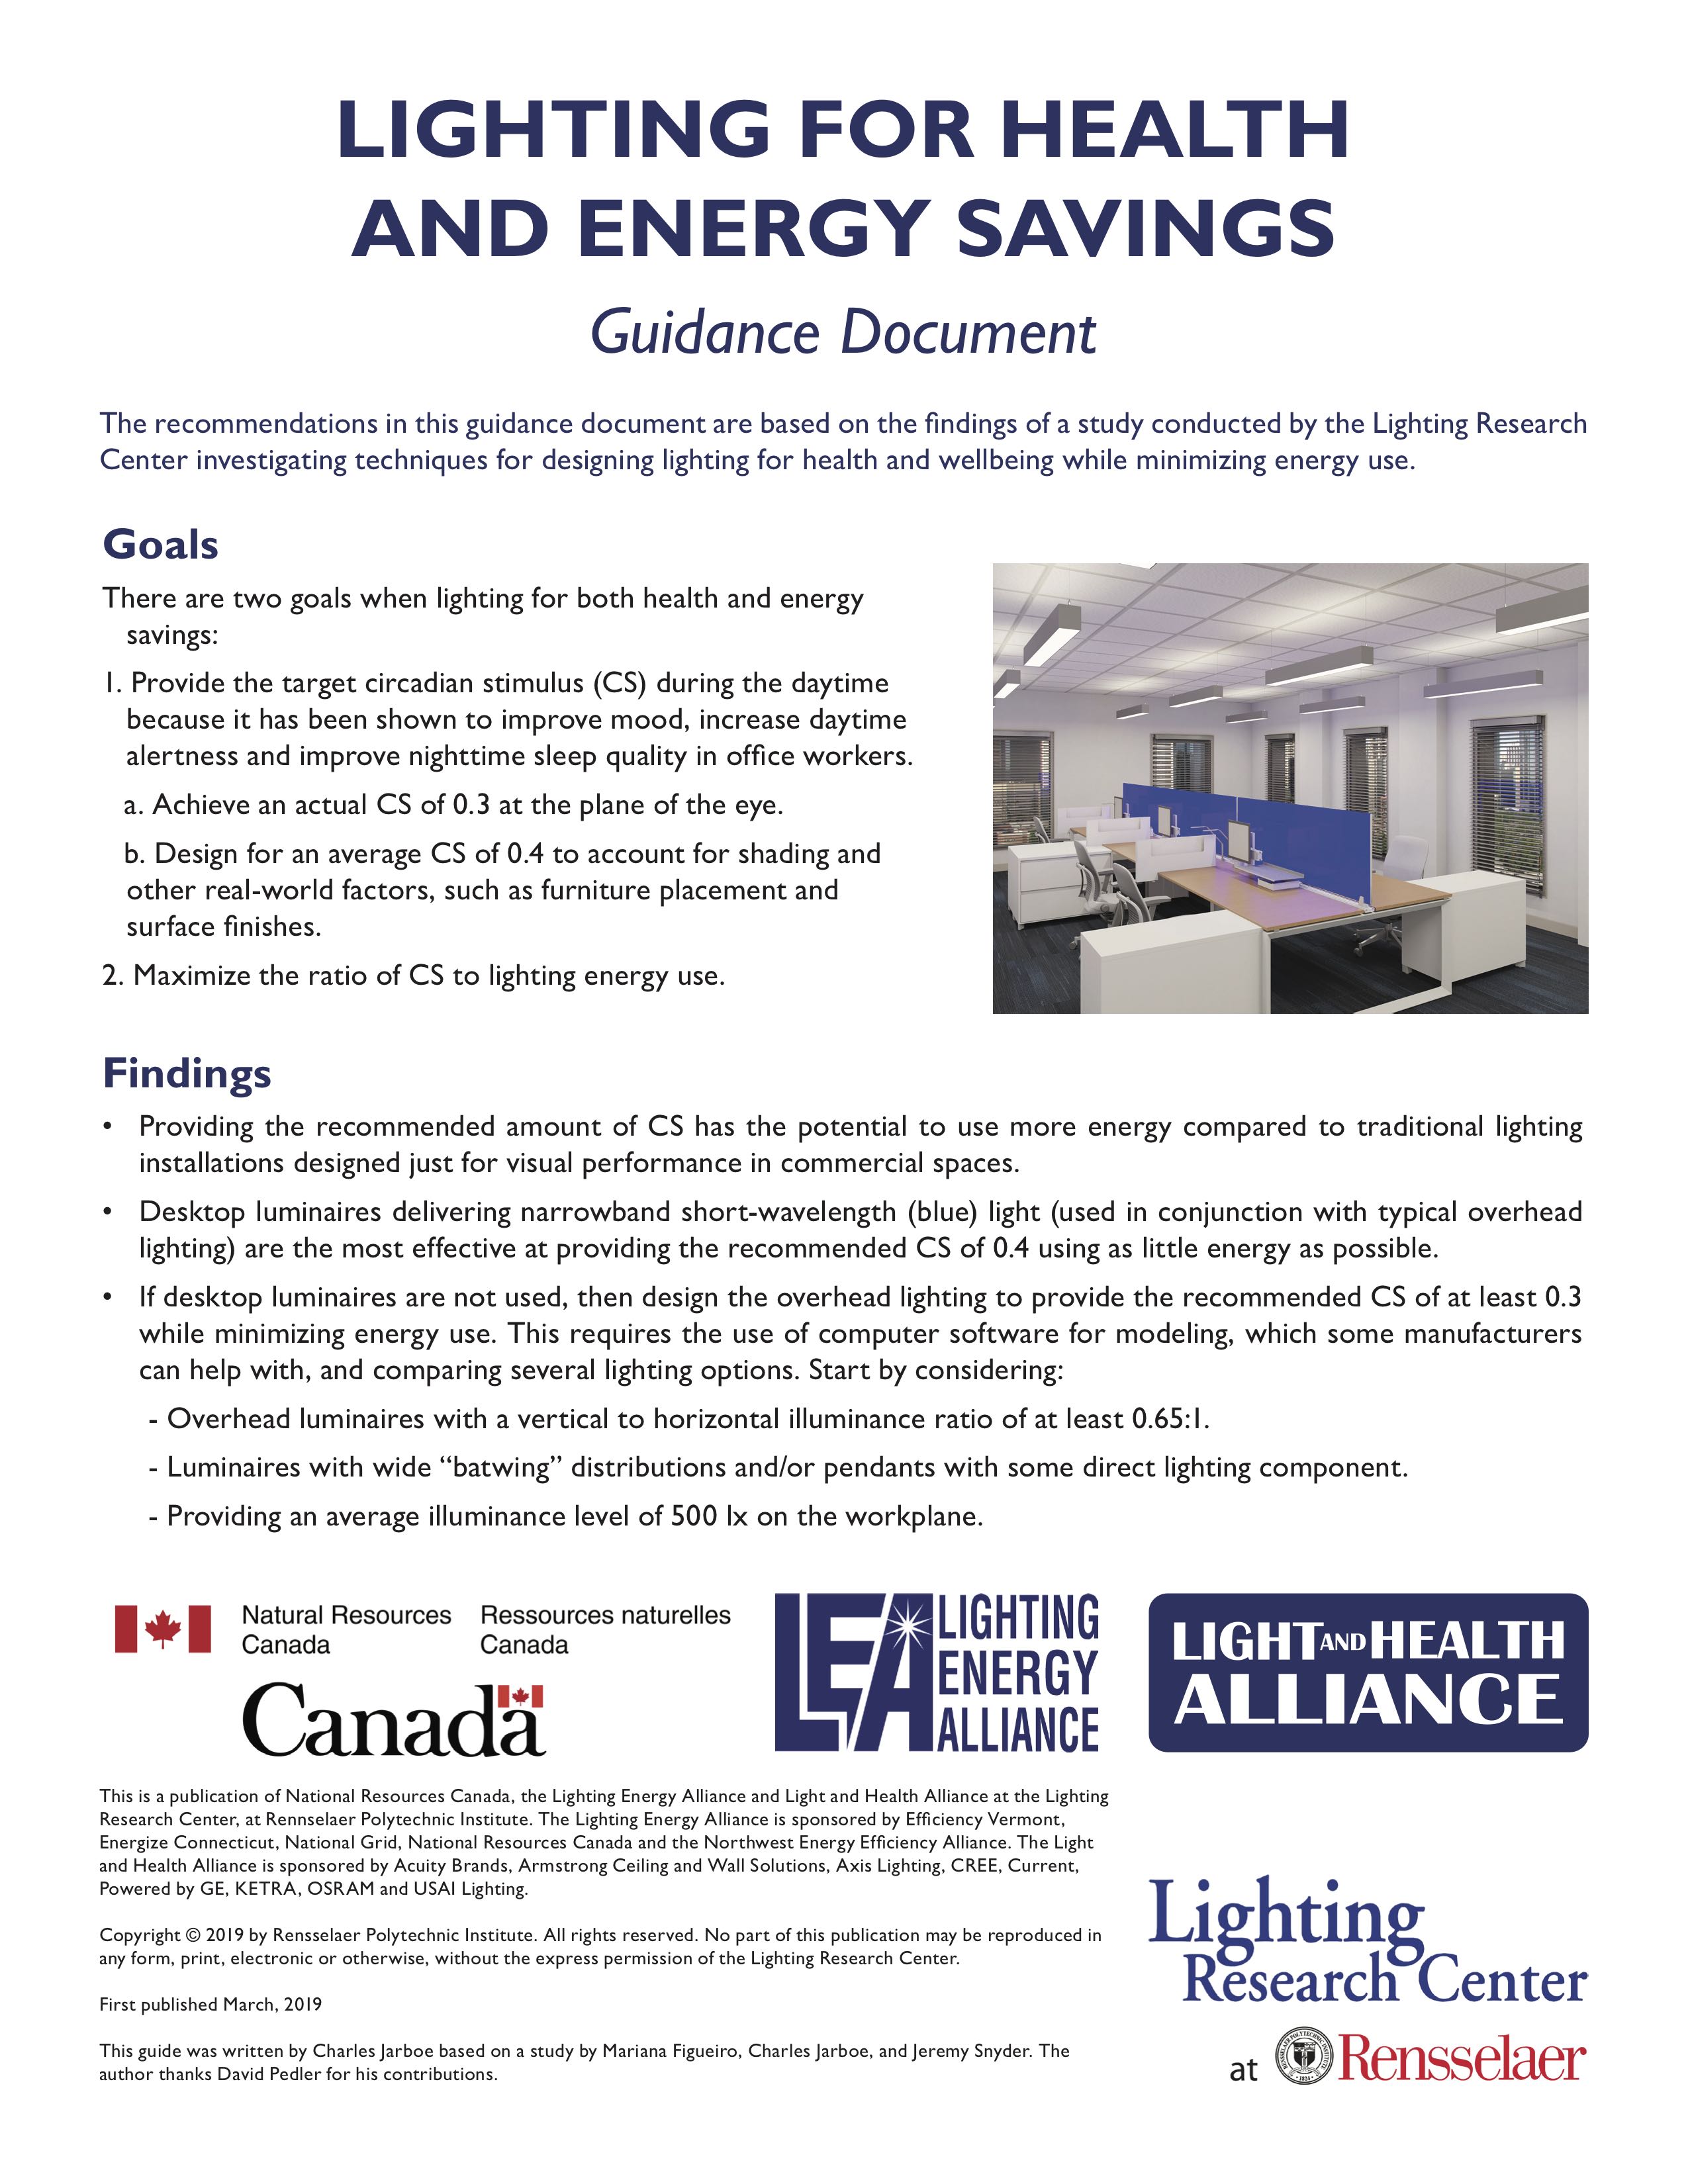 Lighting for Health and Energy Savings guidance document cover